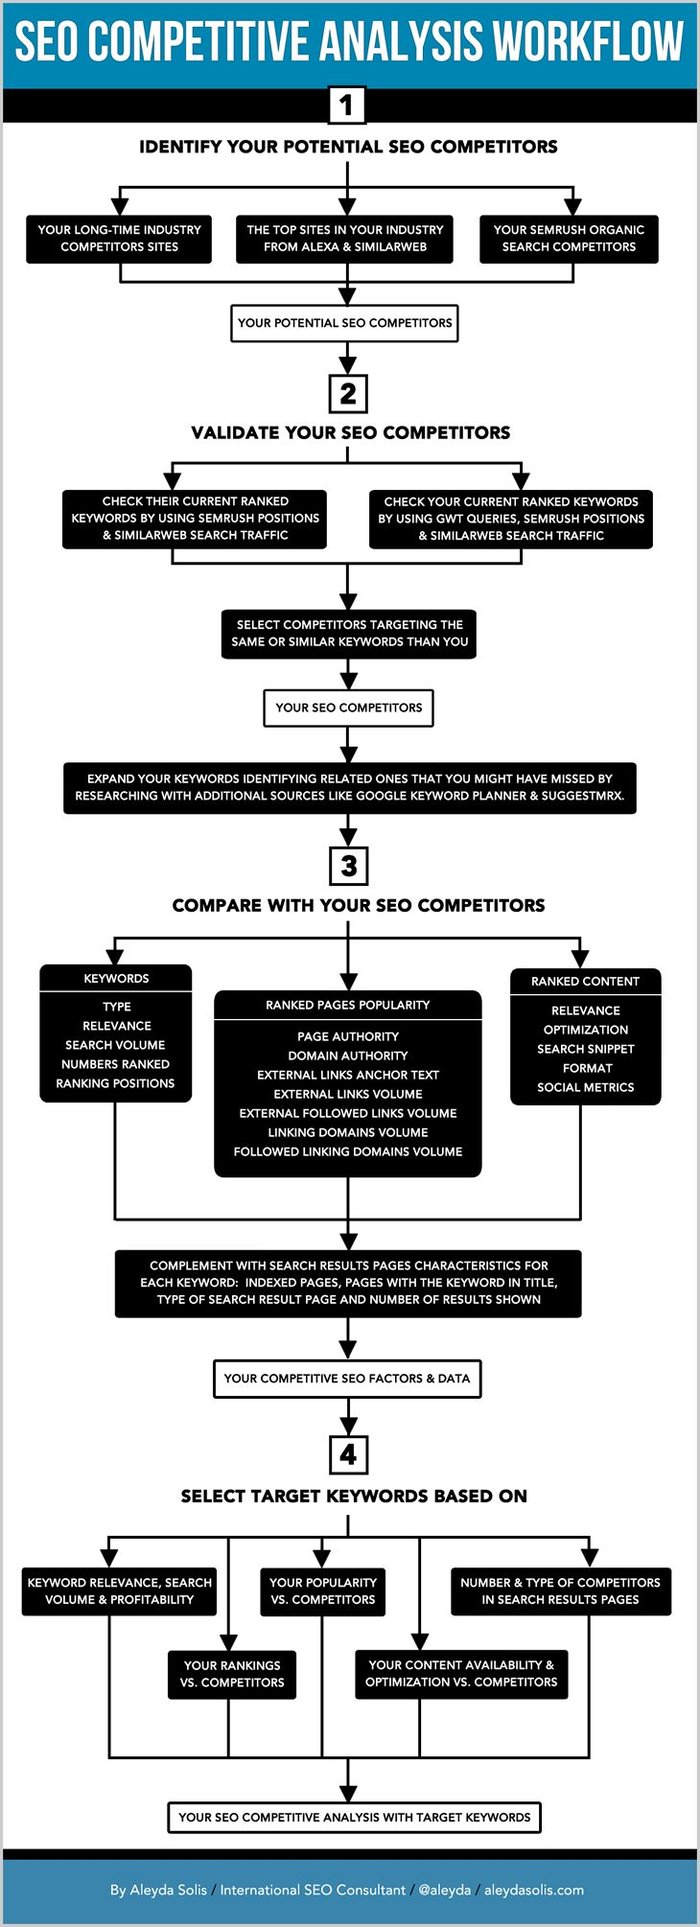 SEO Competitive Analysis Workflow